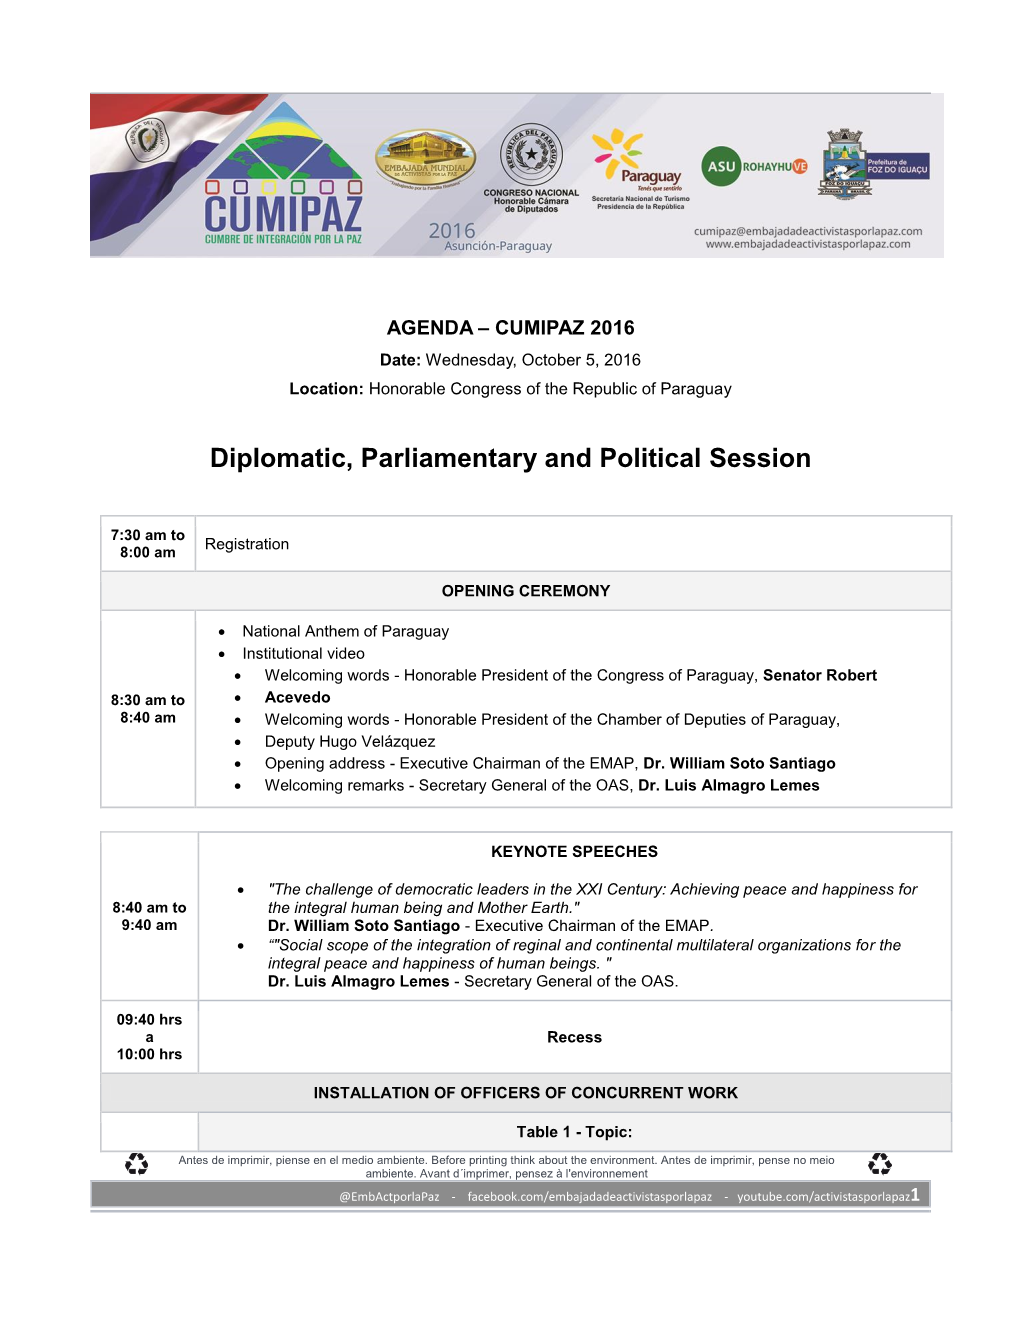 Diplomatic, Parliamentary and Political Session